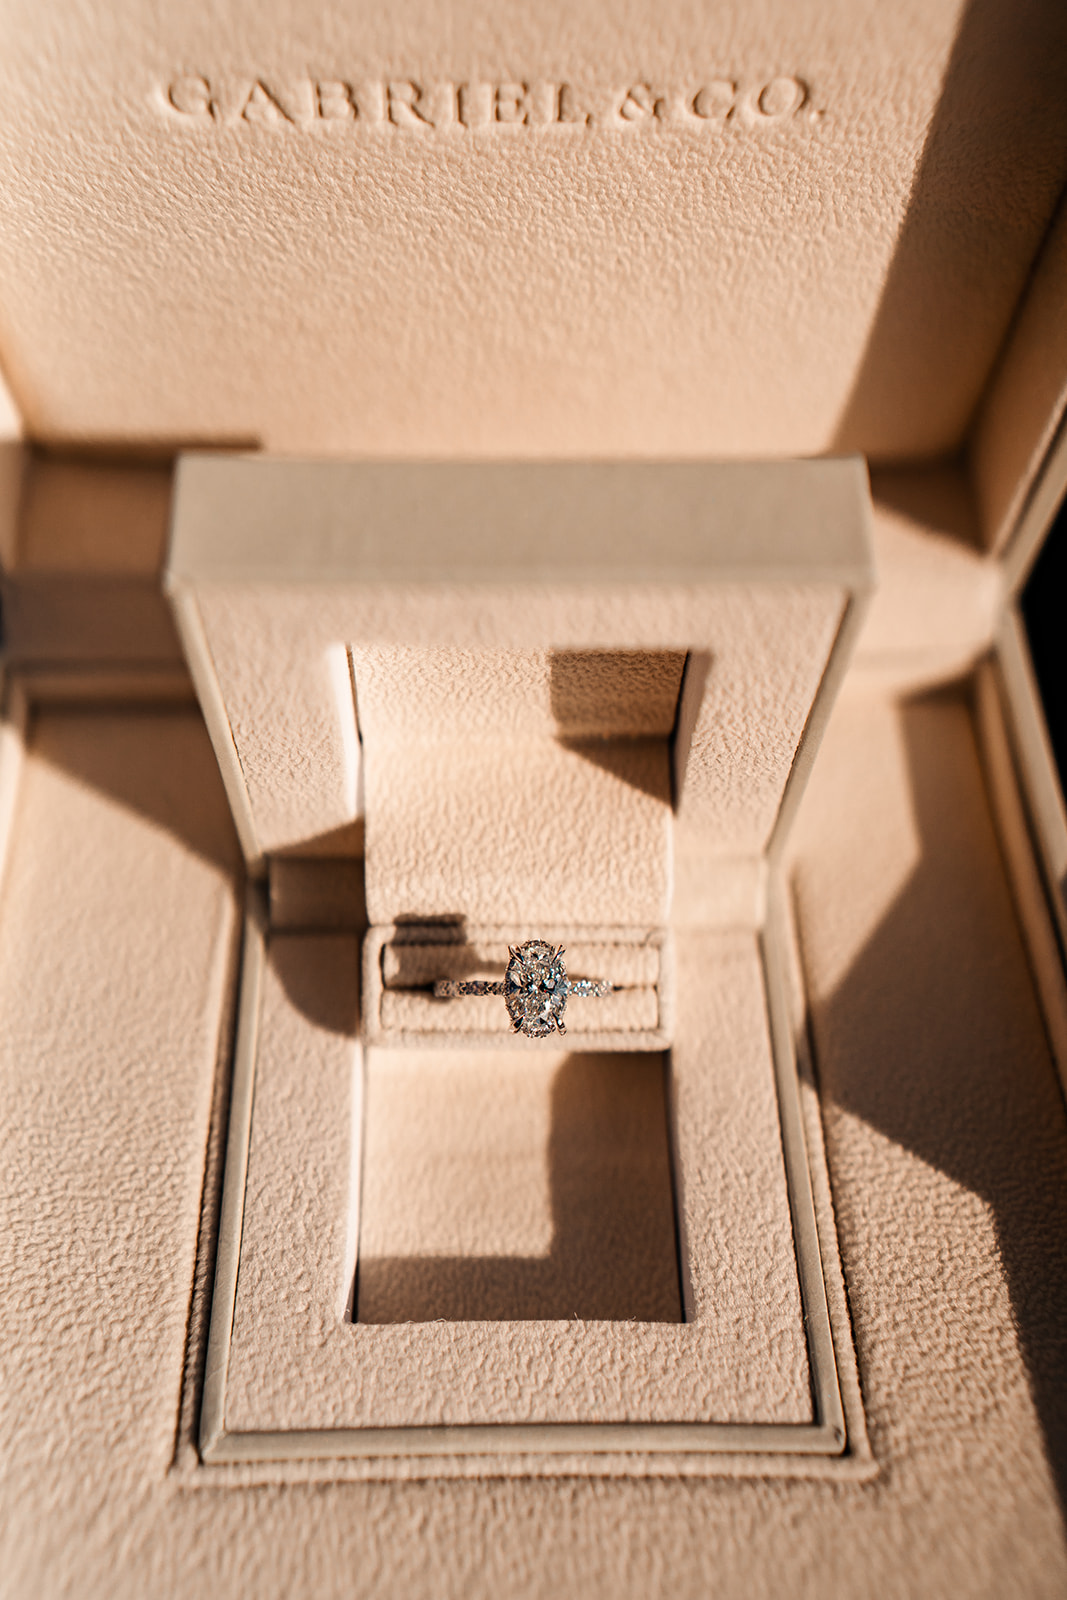 Oval cut Gabriel & Co. engagement ring in box